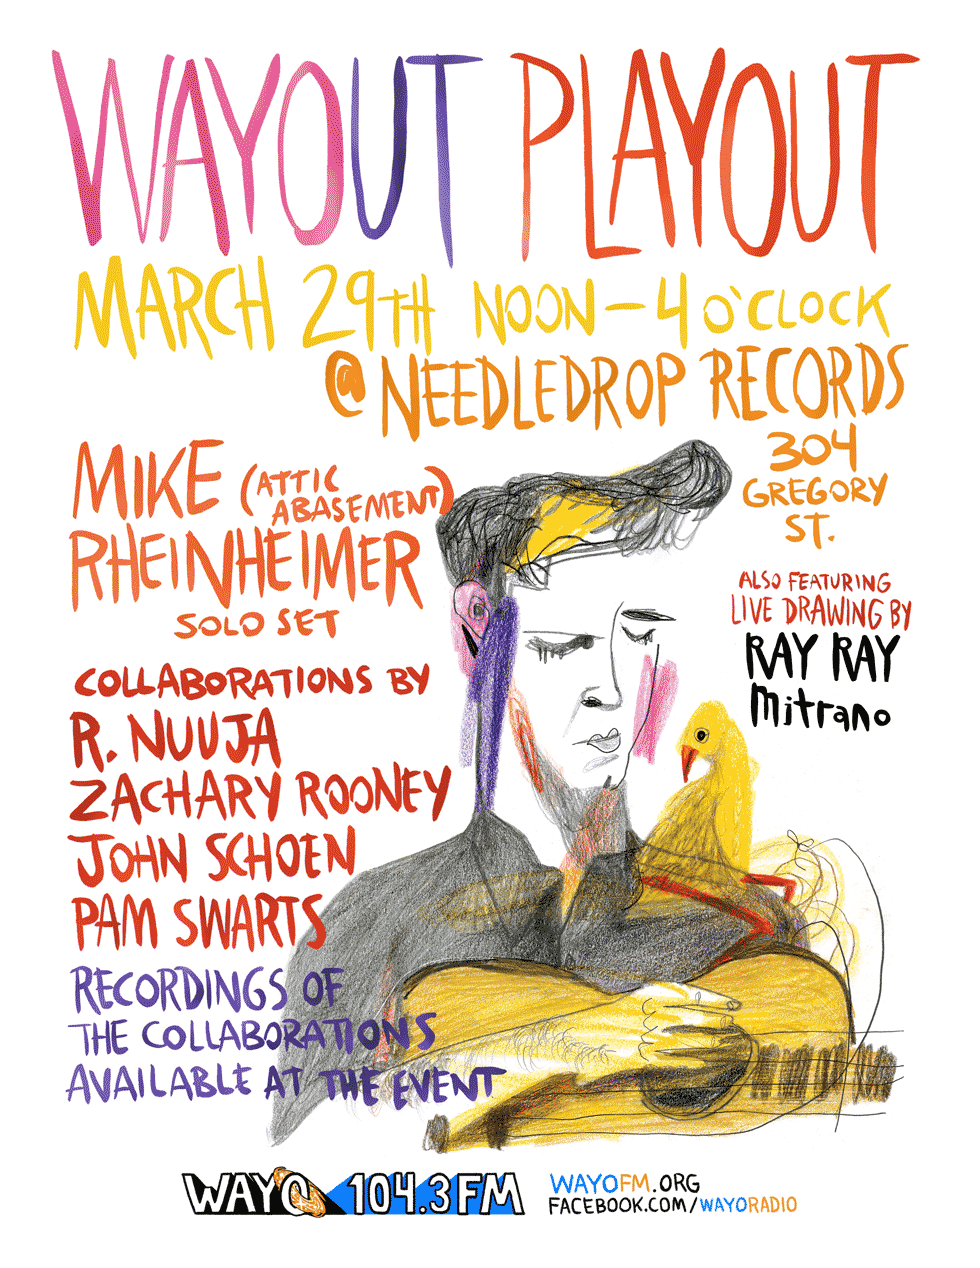 On March 29 at Needledrop Records four musicians – R. Nuuja, Zachary Rooney, John Schoen, and Pam Swarts – will collaborate to create two 15 minute pieces live in the store.